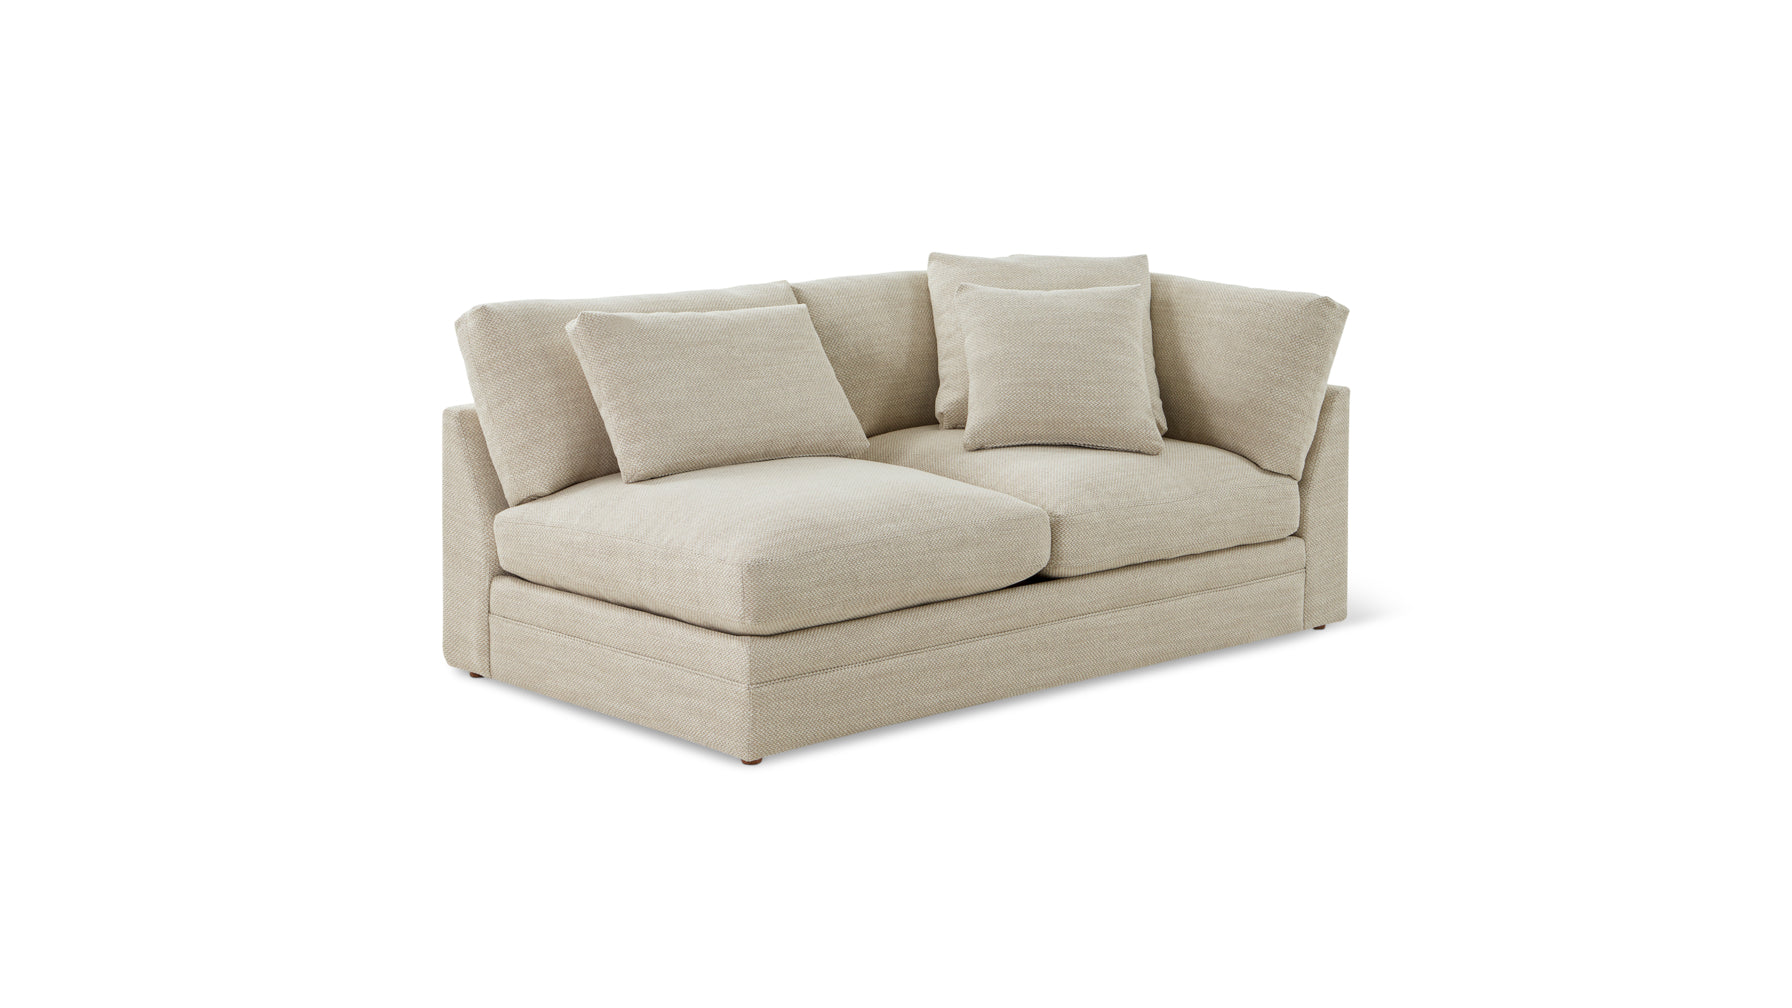 Feel Good 1-Arm Sofa, Right, Oyster - Image 2